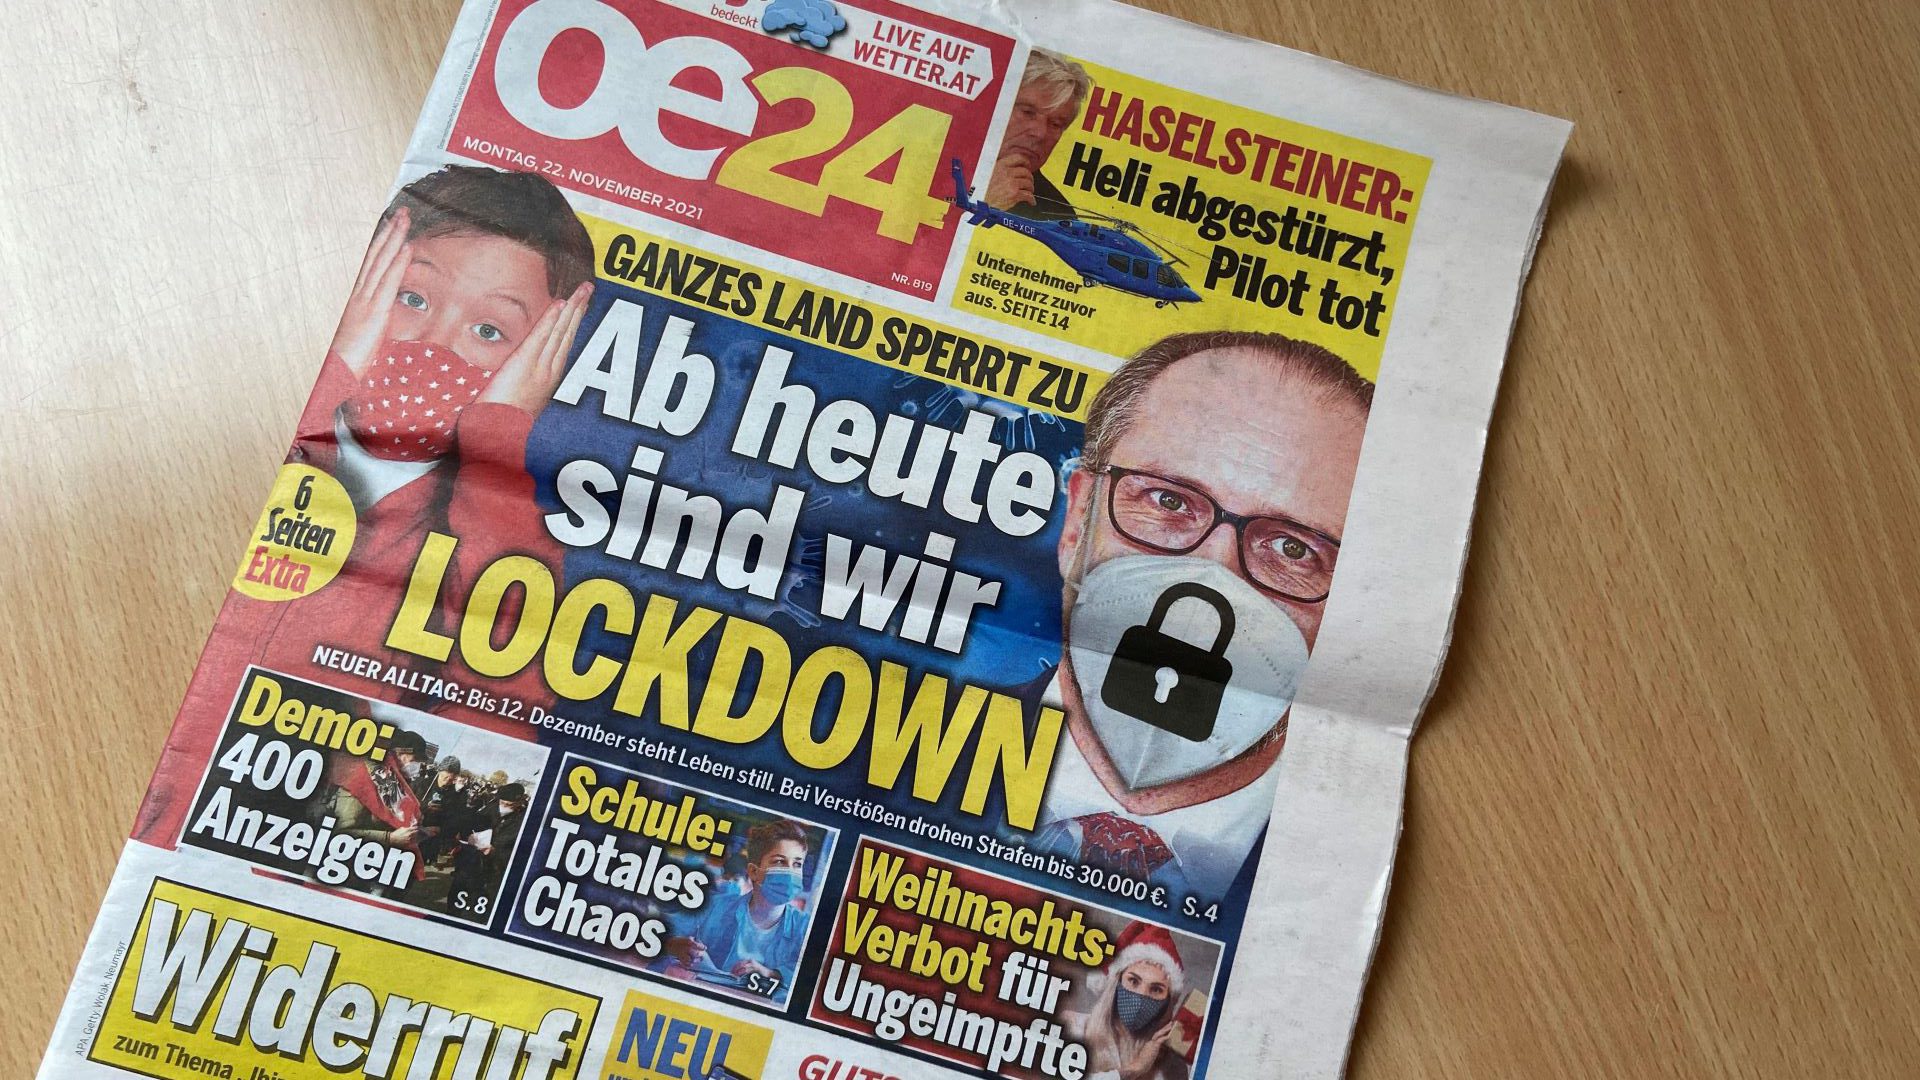 In Austria, COVID authoritarianism is reaching disturbing new levels. A nationwide lockdown has reintroduced and being unvaccinated will soon be illegal